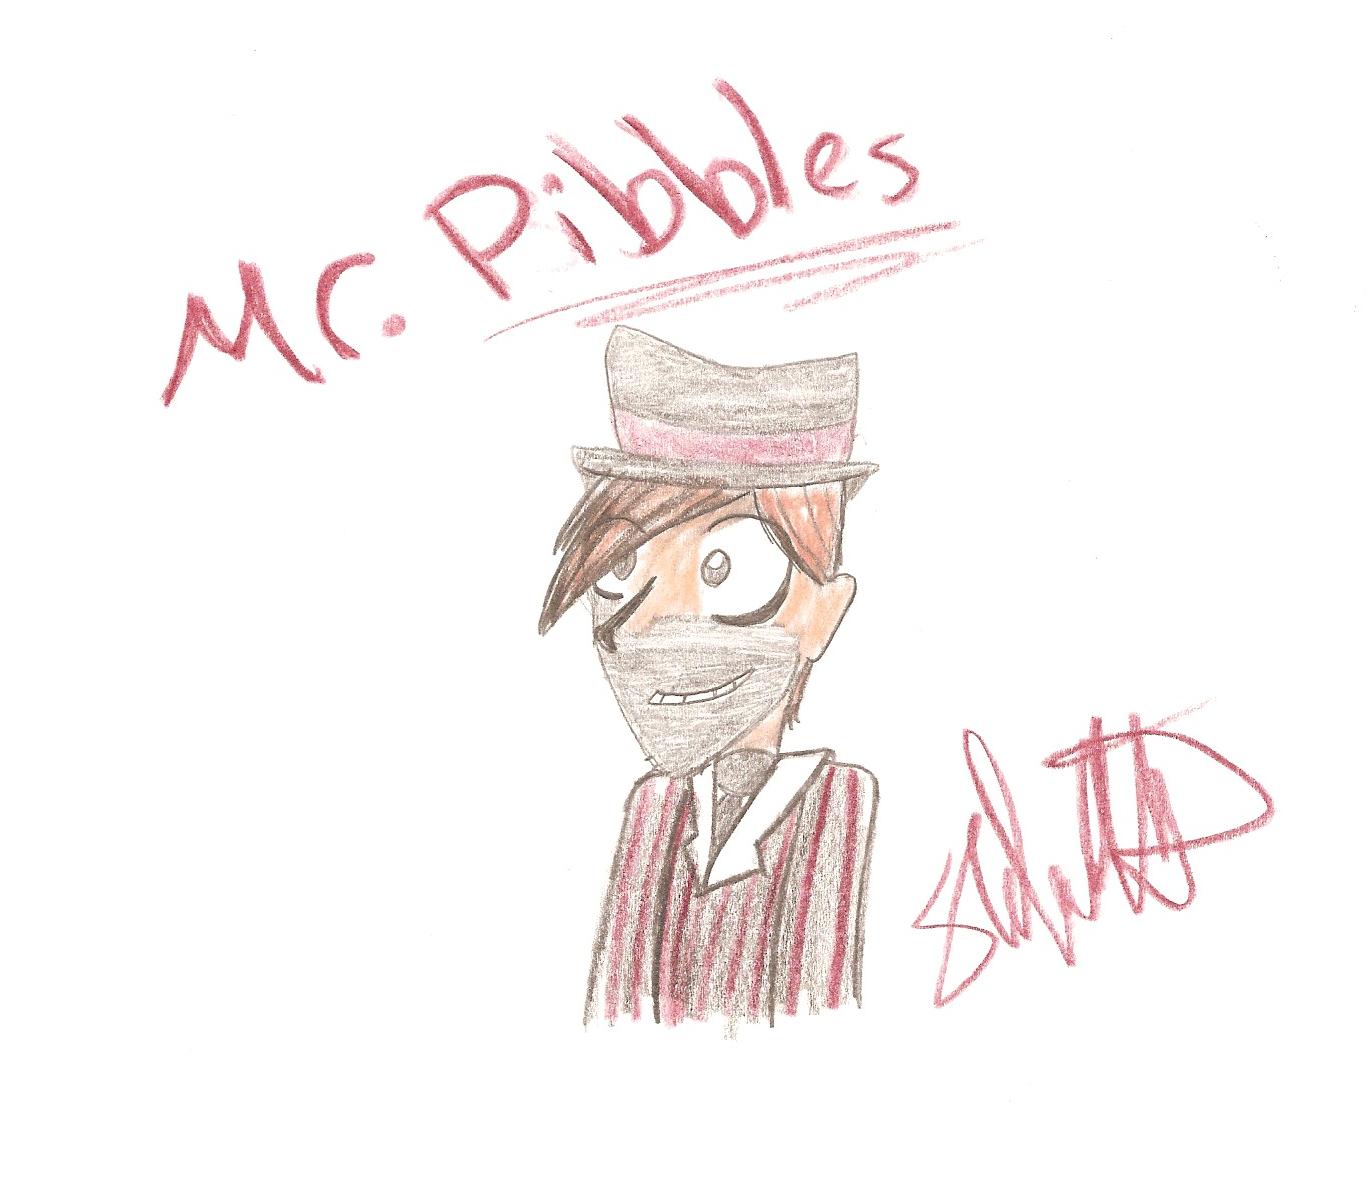 Mister Pibbles by shadow101